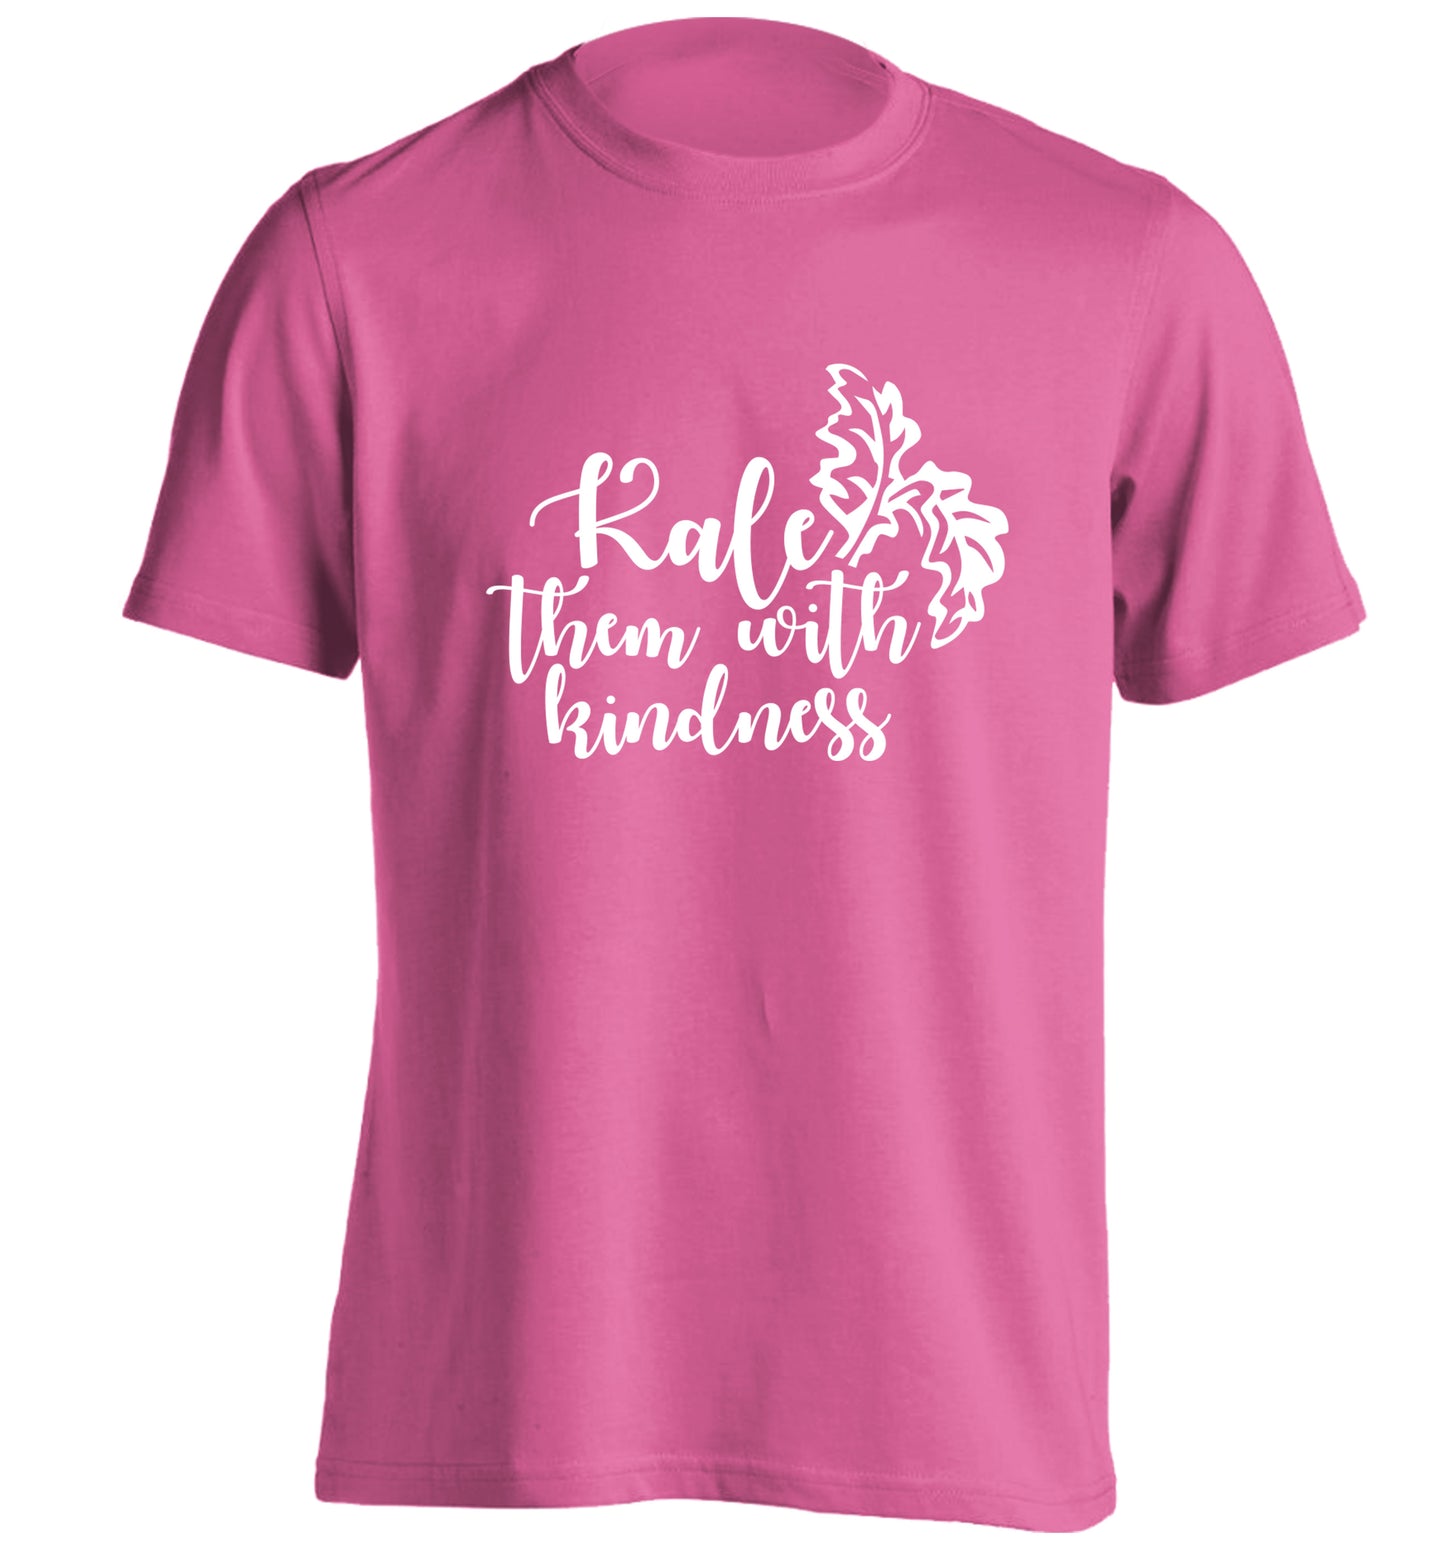 Kale them with kindness adults unisex pink Tshirt 2XL